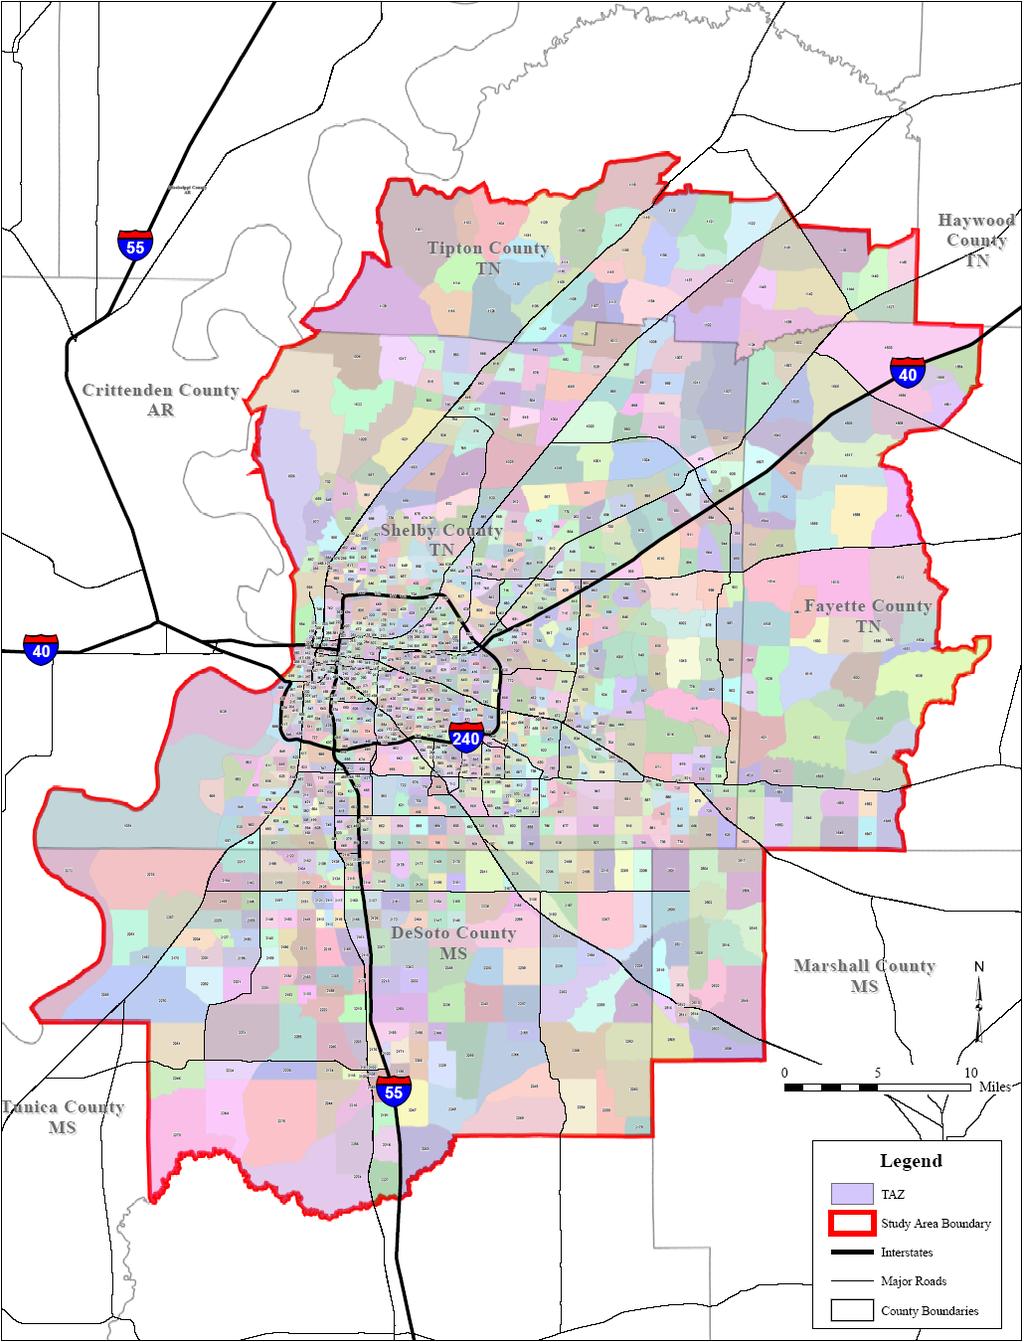 Source: Memphis and Shelby County, Metropolitan Planning